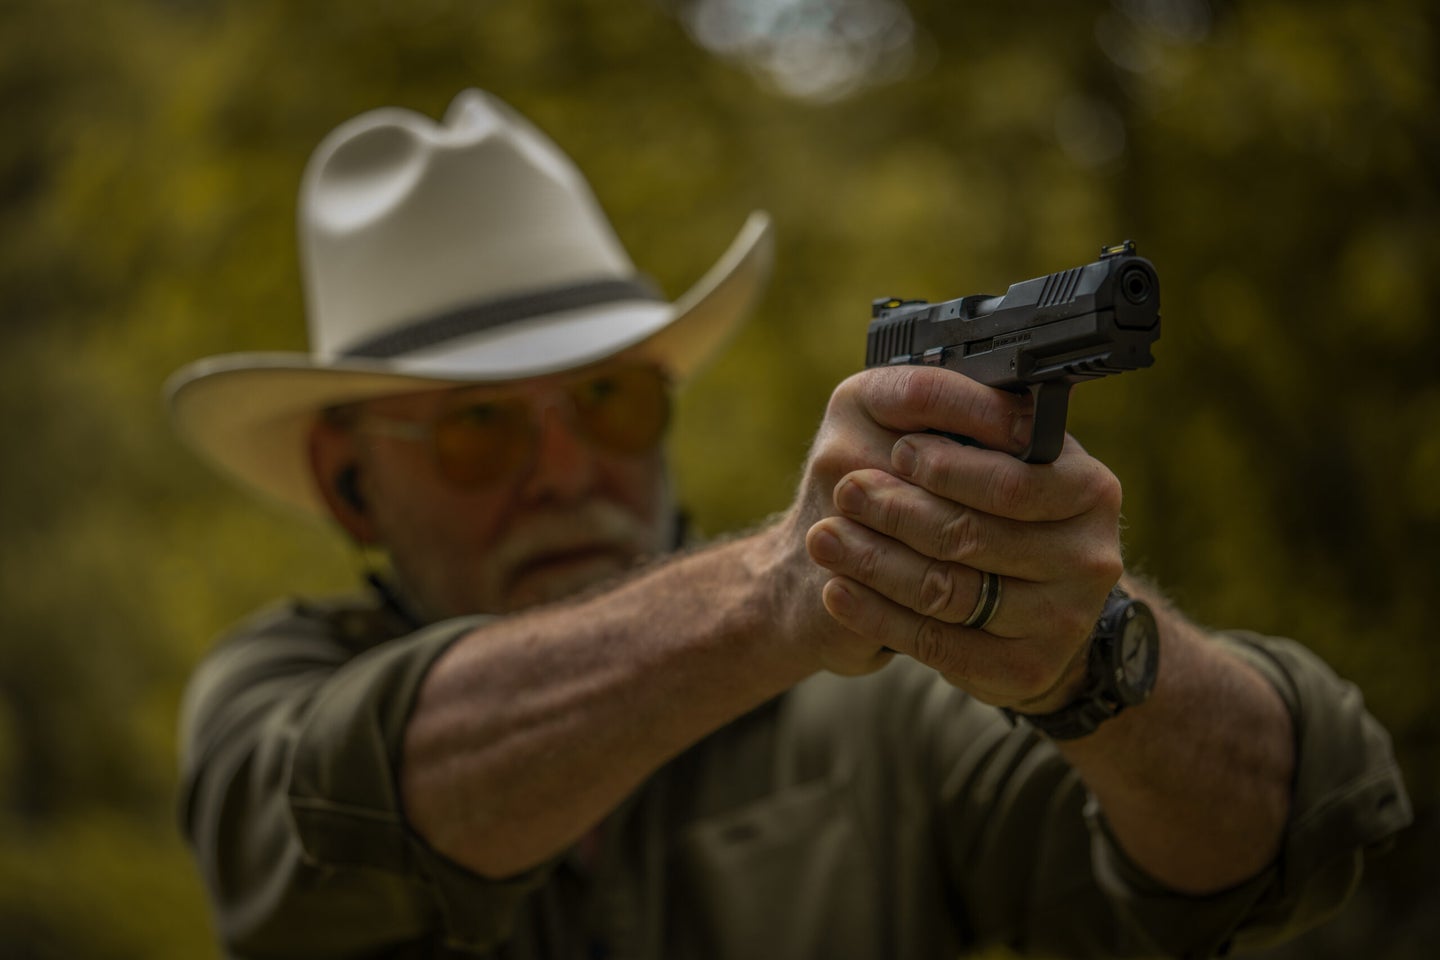 There may be no better handgun for teaching and recreational target shooting than a .22 pistol.